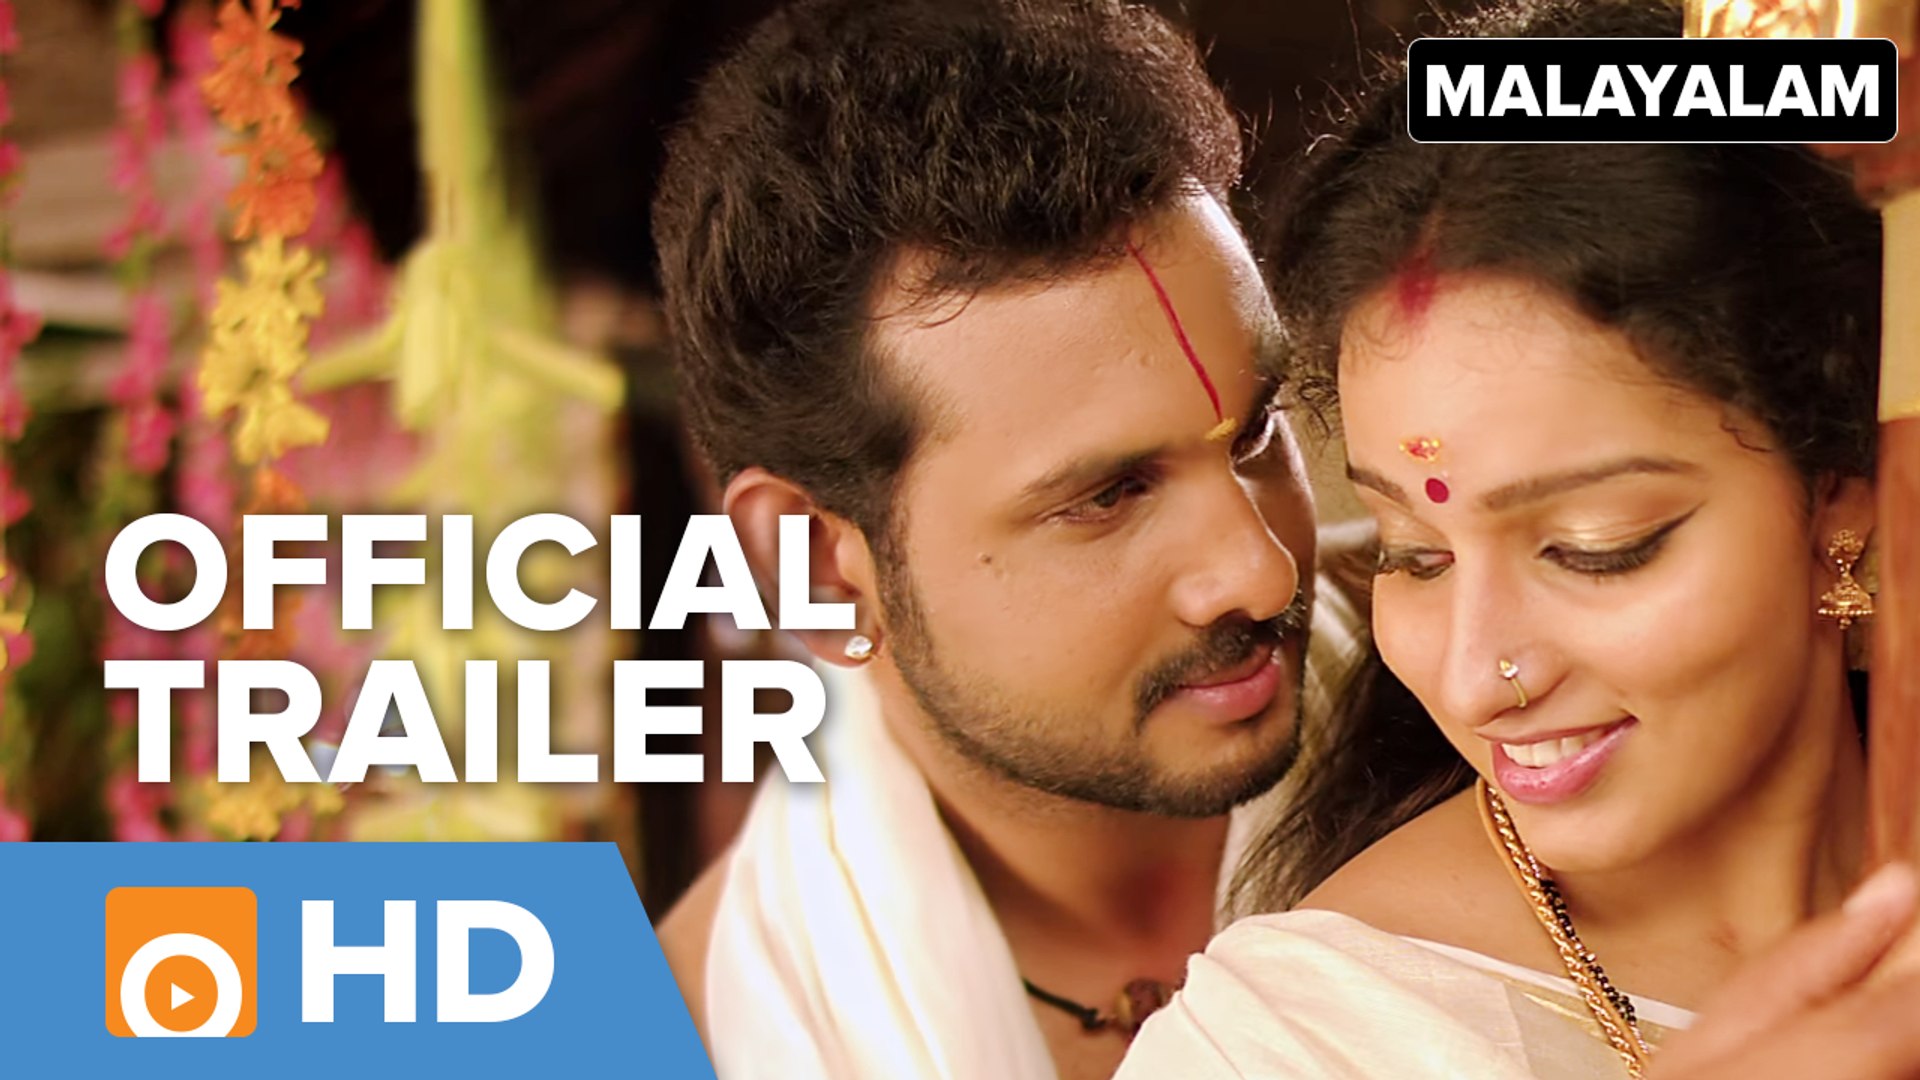 Malayalam by Coming Trailer - Dailymotion